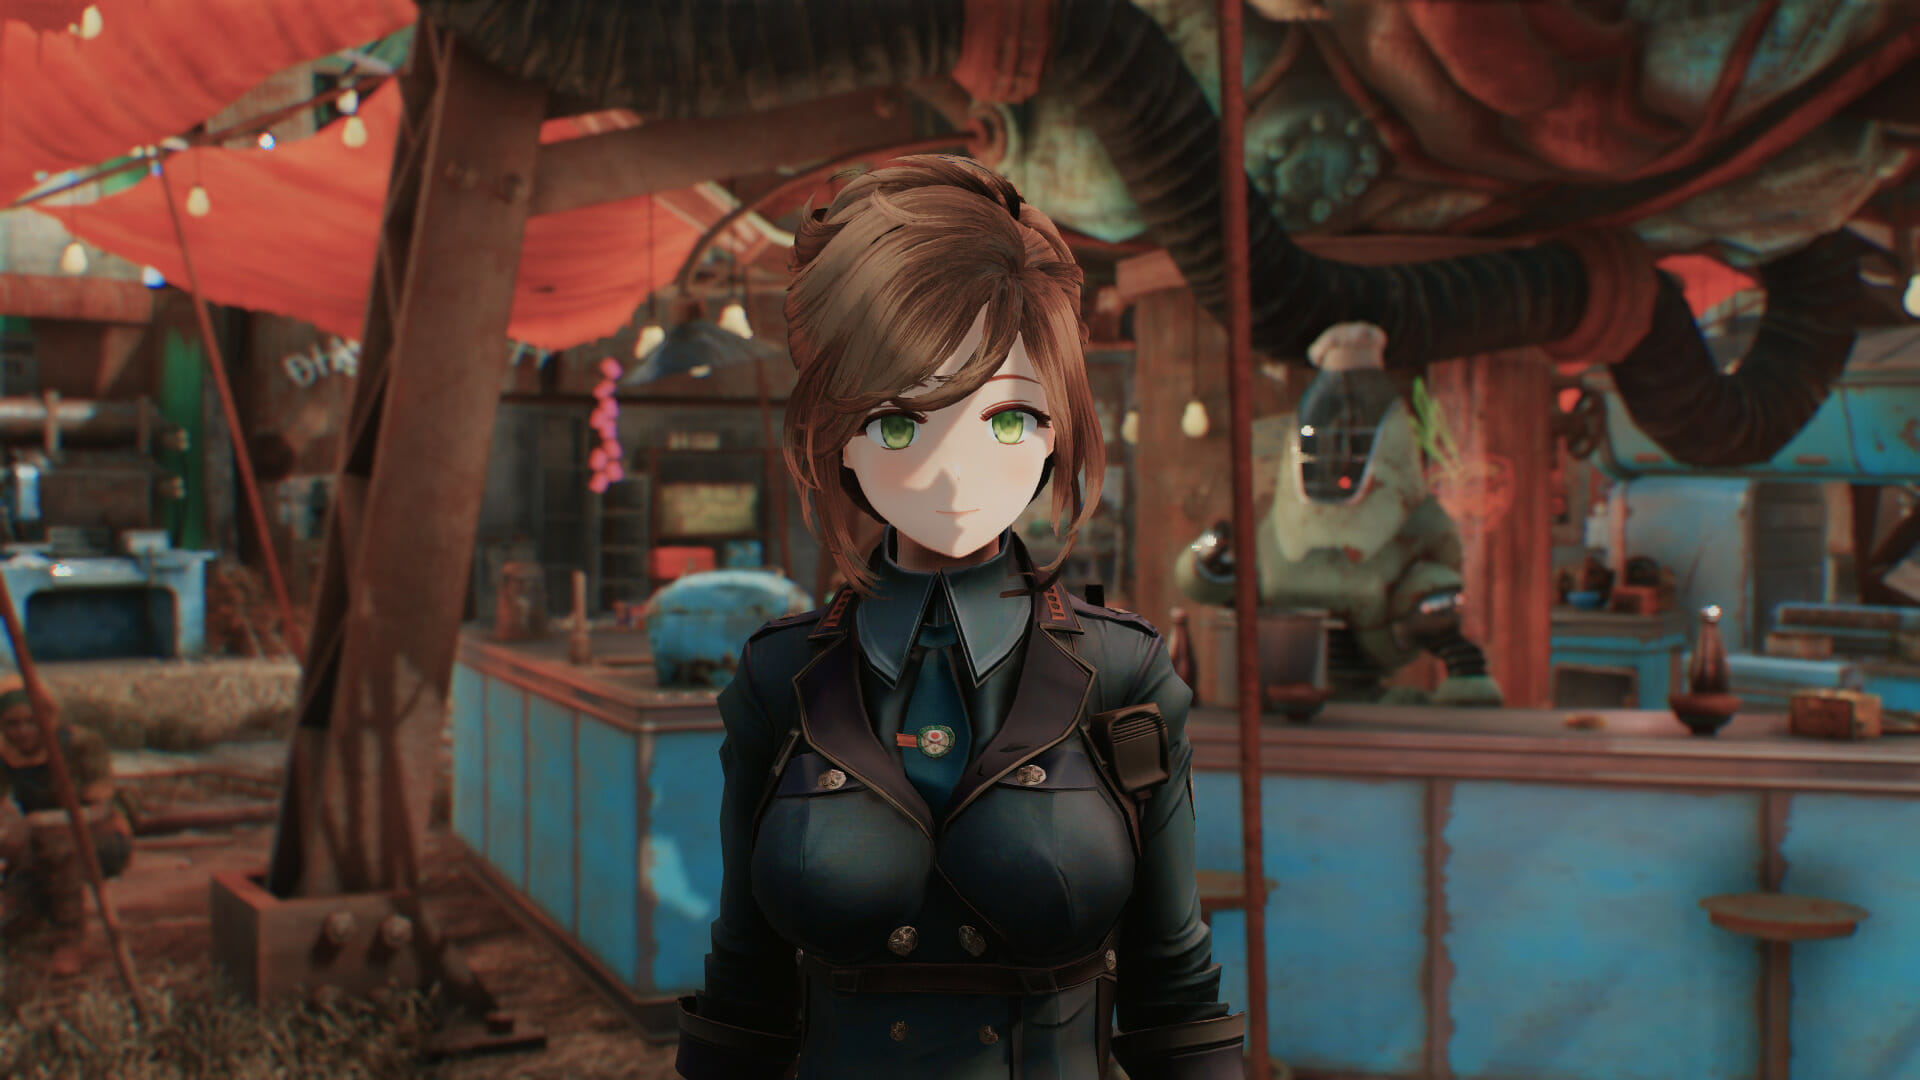 Fallout 4 Mod Makes Your Character a Cute Anime Girl - VGU